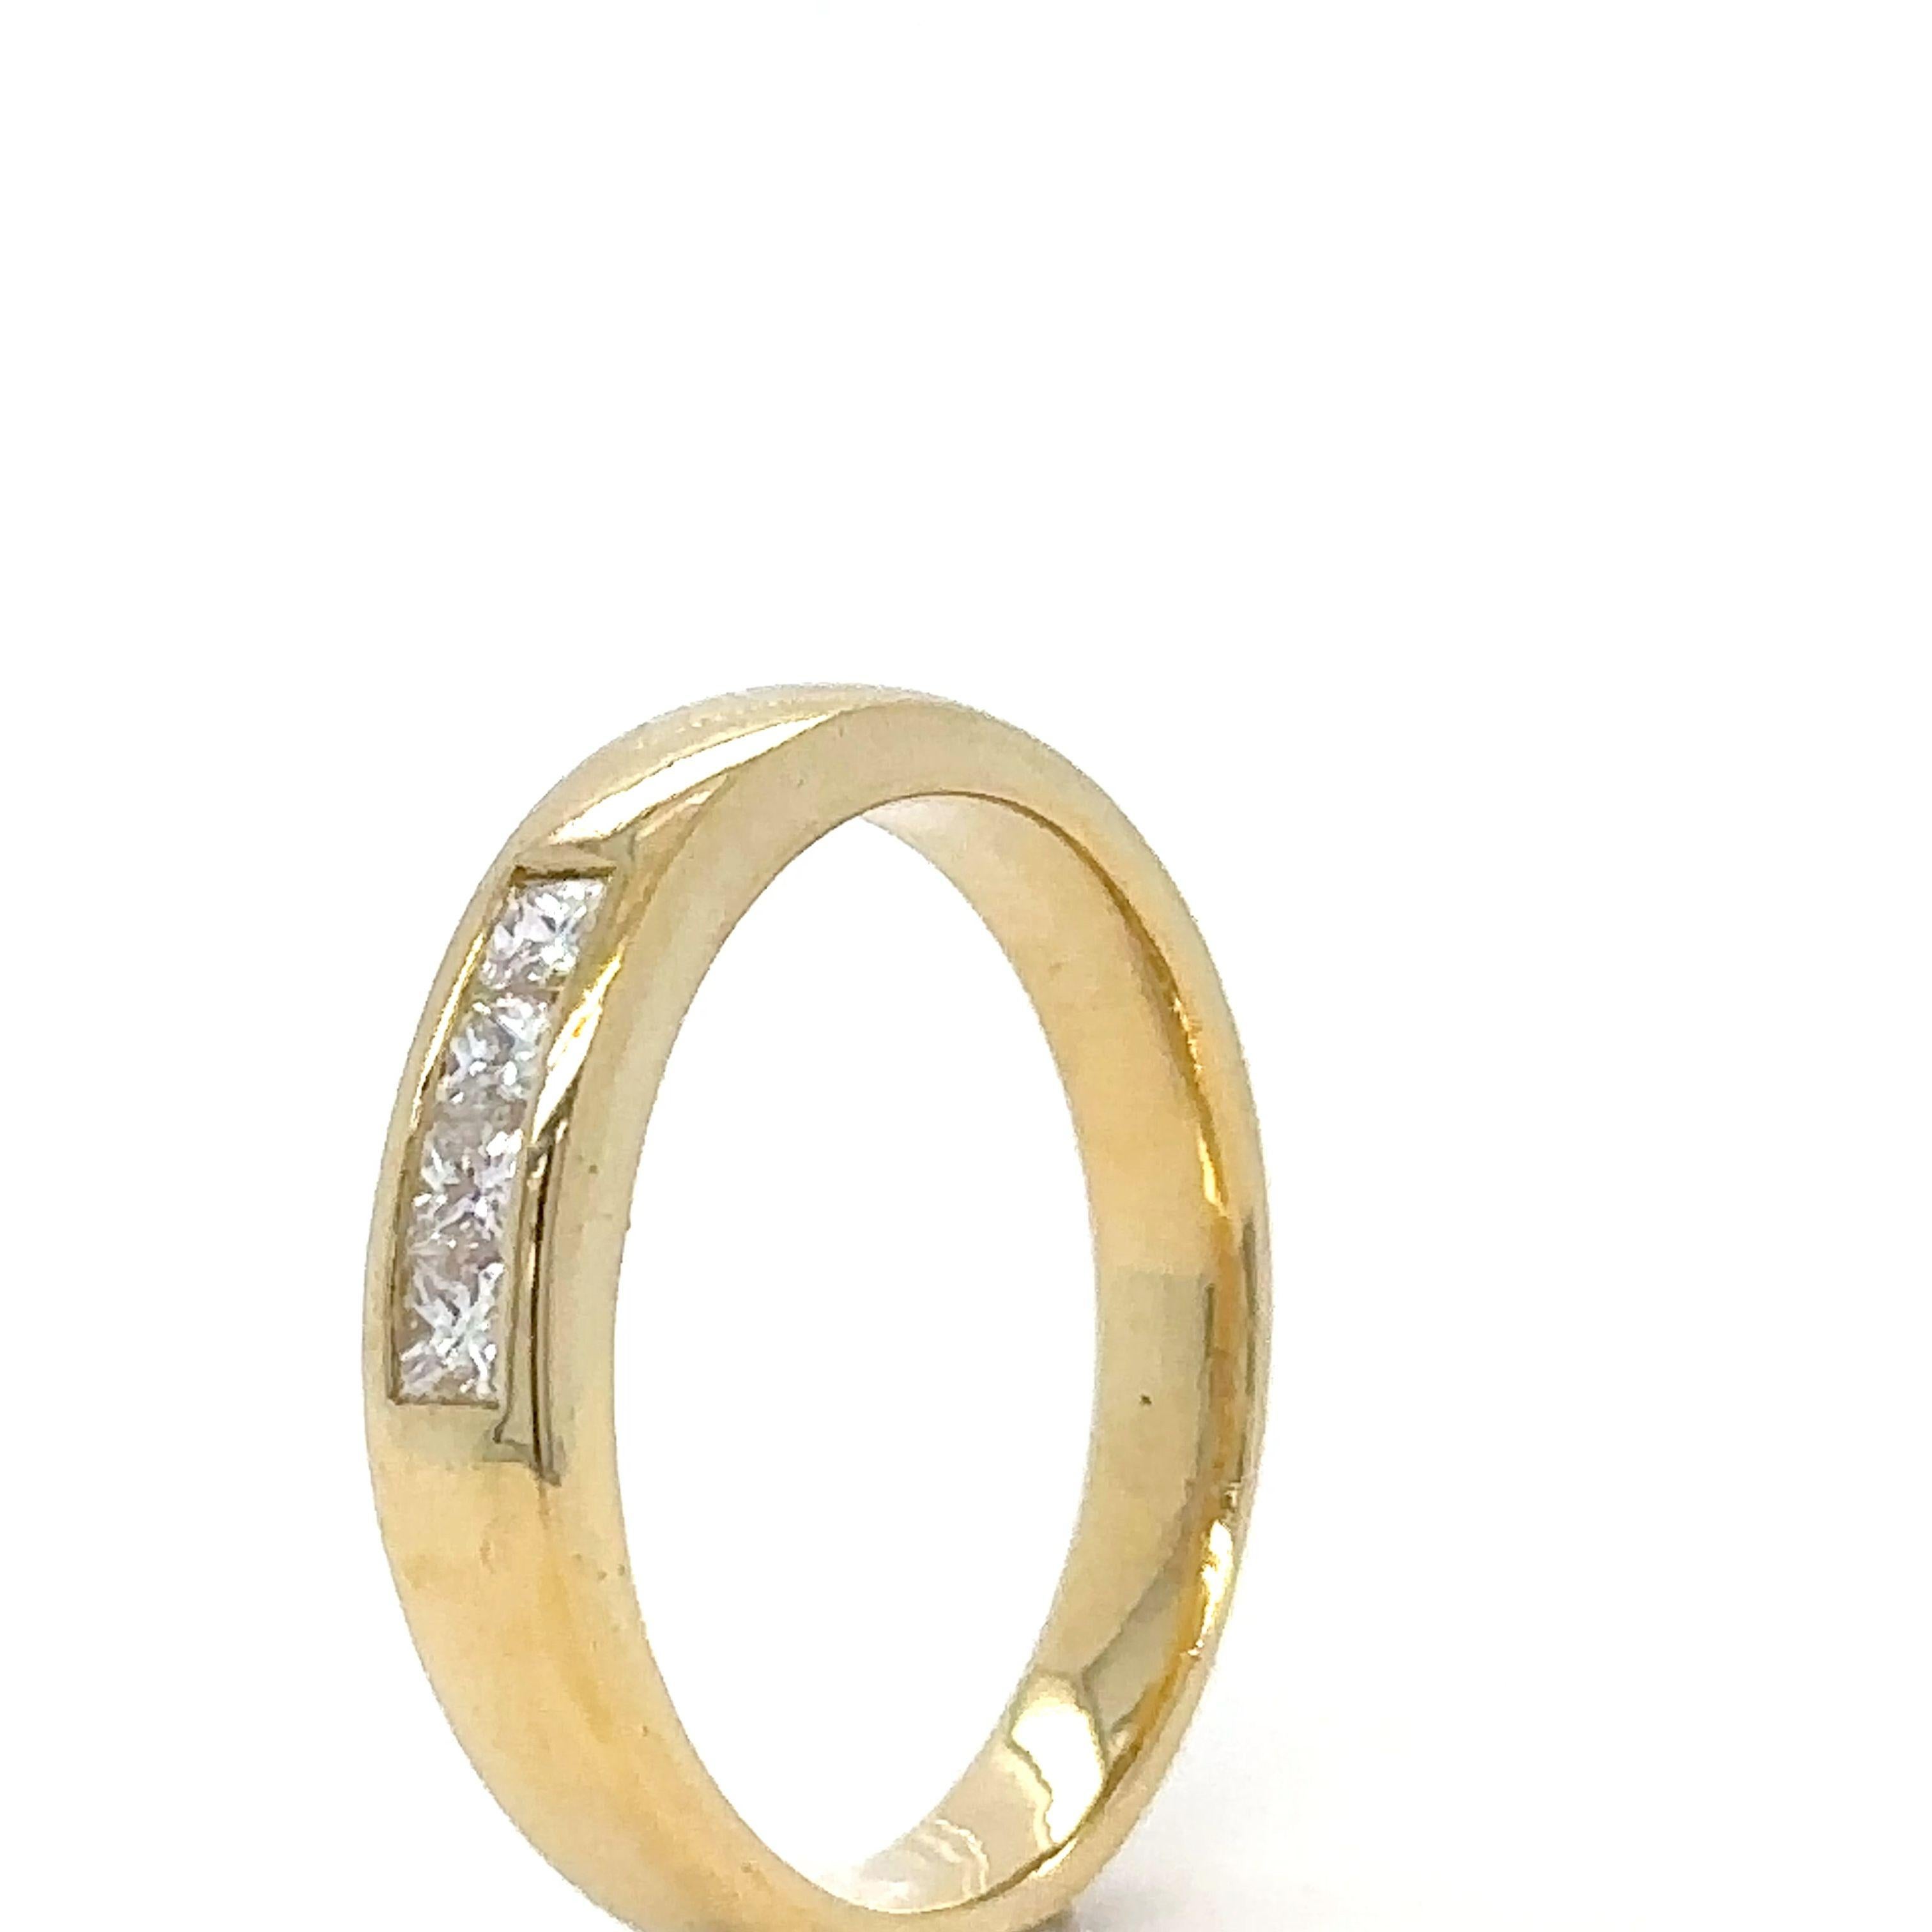 A Four Stone Princess Cut Diamond Ring, channel set in 18ct yellow gold on a 3.7 to 3.1mm tapered band.

Diamonds 4 = 0.24ct (estimated),

Graded in setting as Colour: F, Clarity: VS. Weight 4.66 grams.
Metal: 18ct Yellow Gold
Carat: 0.24ct
Colour: